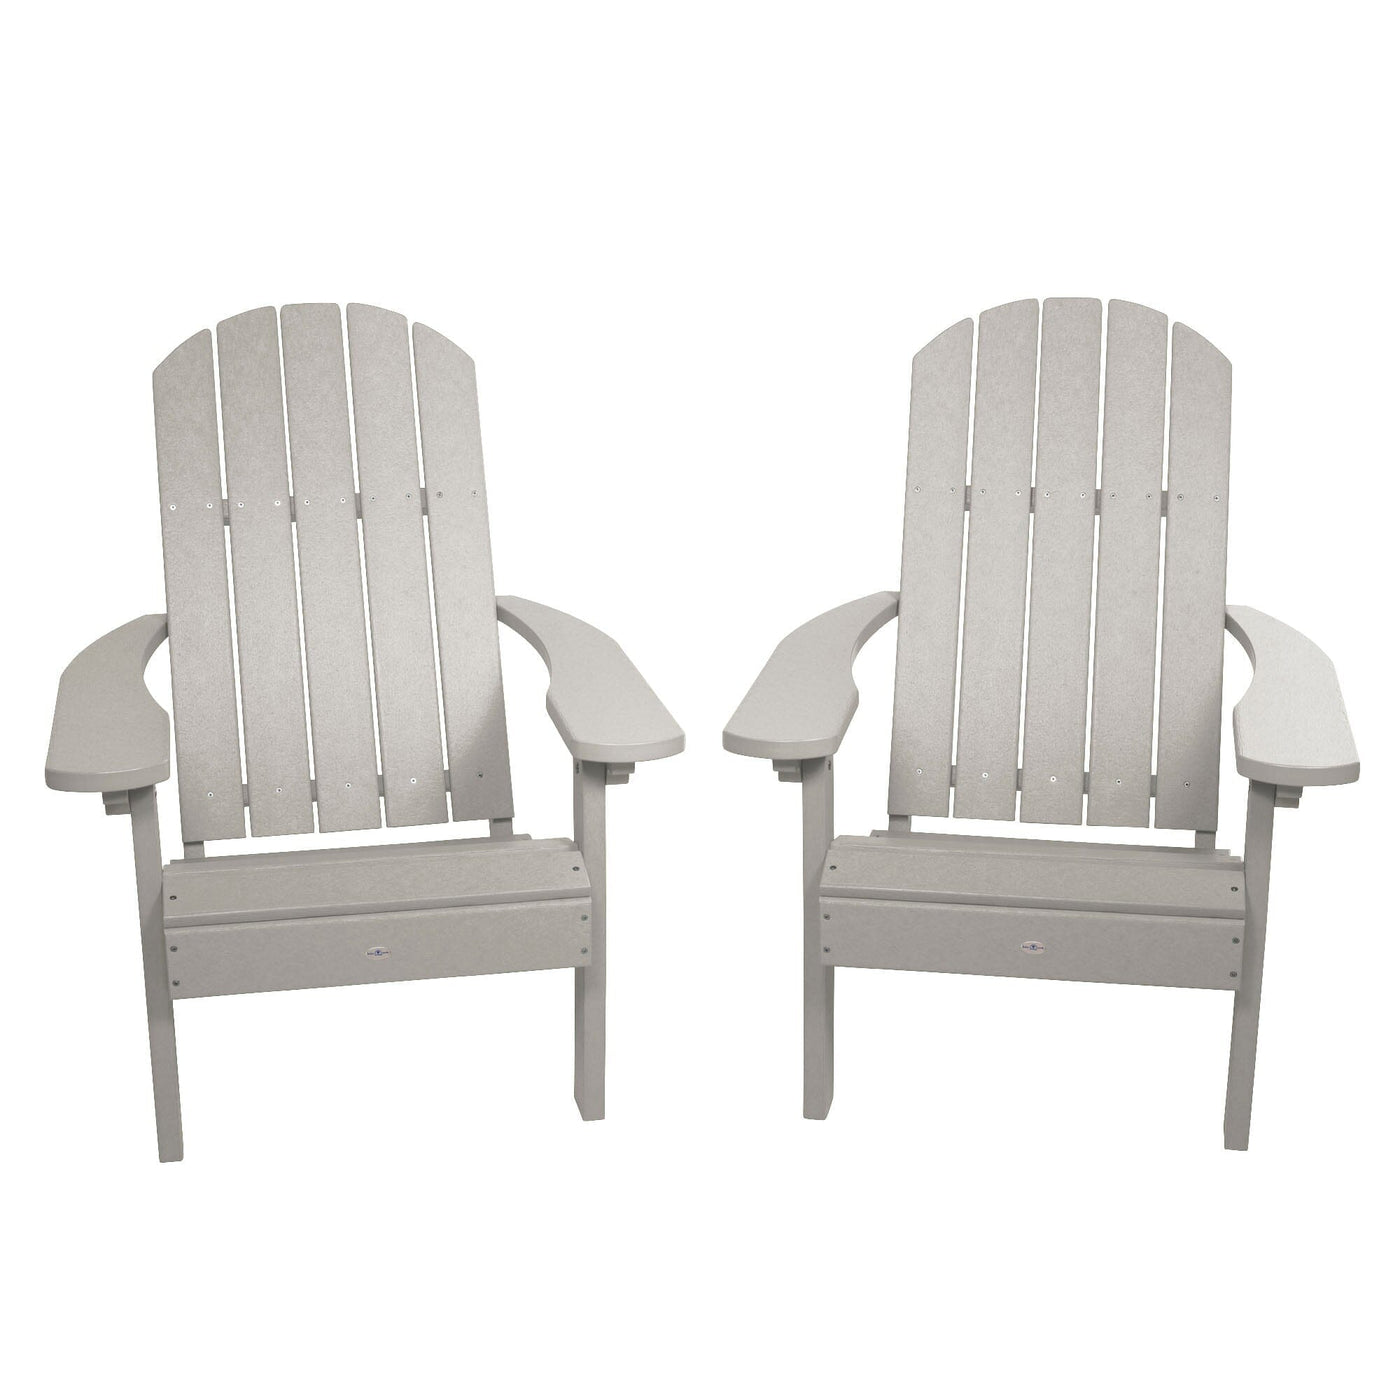 Cape Classic Adirondack Chair (Set of 2) Kitted Set Bahia Verde Outdoors Cove Gray 